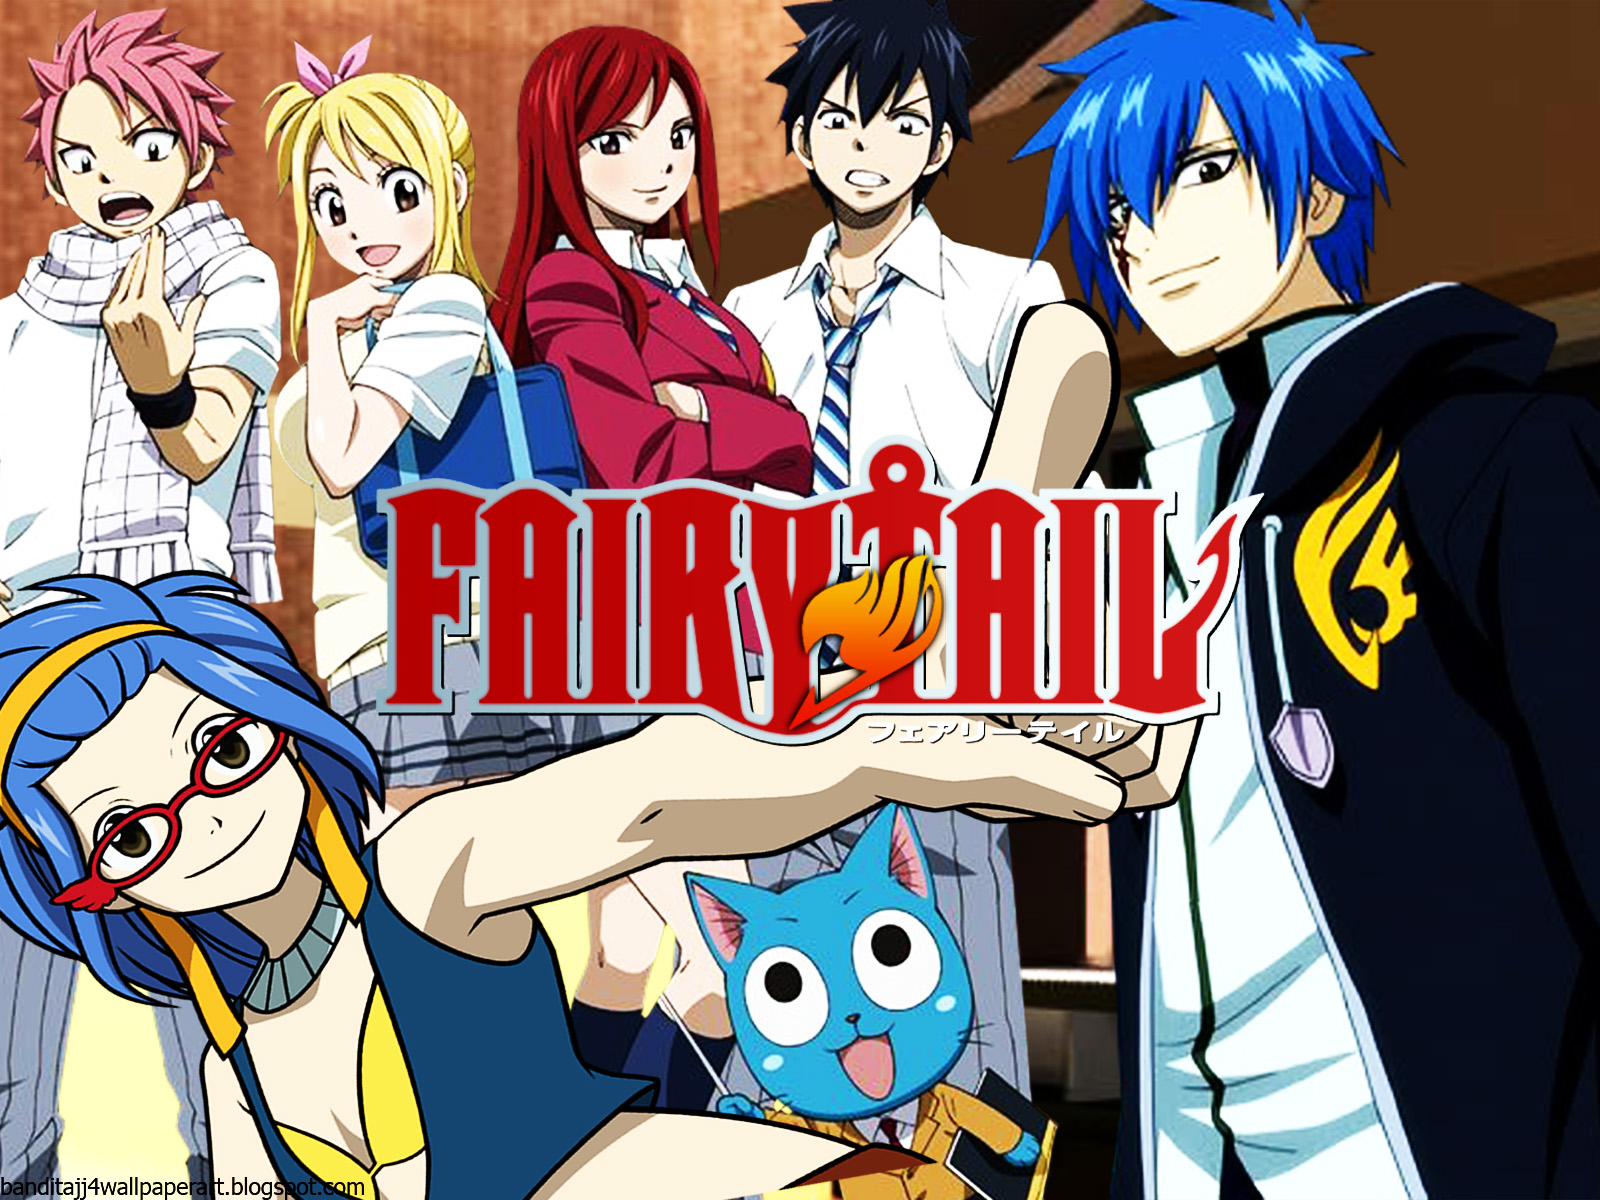 fairy tail wallpaper hd free download #11